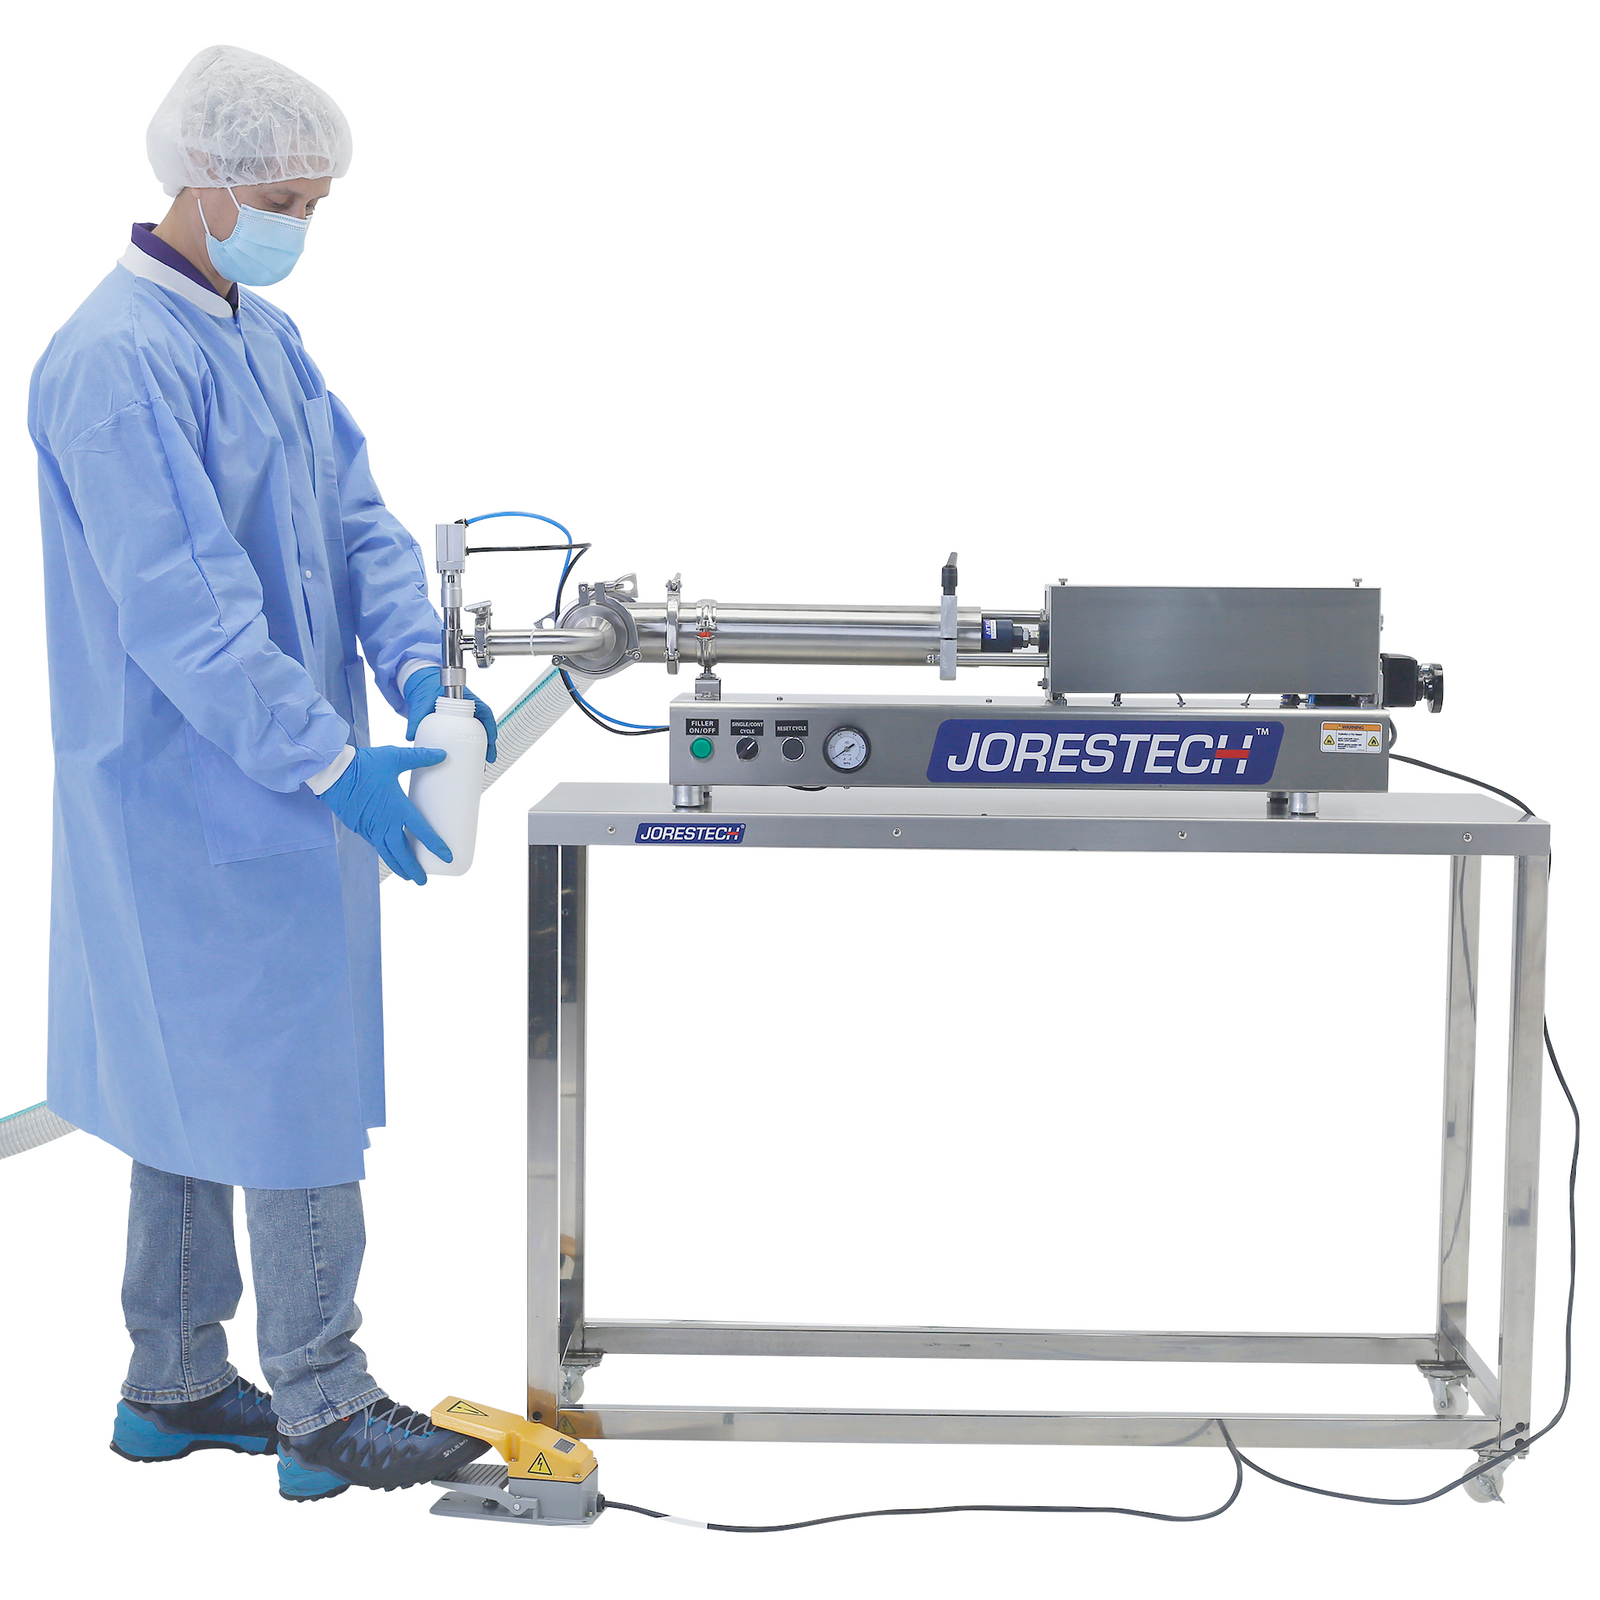 A worker wearing disposable PPE clothes and gloves using a piston filling machine which is positioned on top of a Stainless steel prep work table